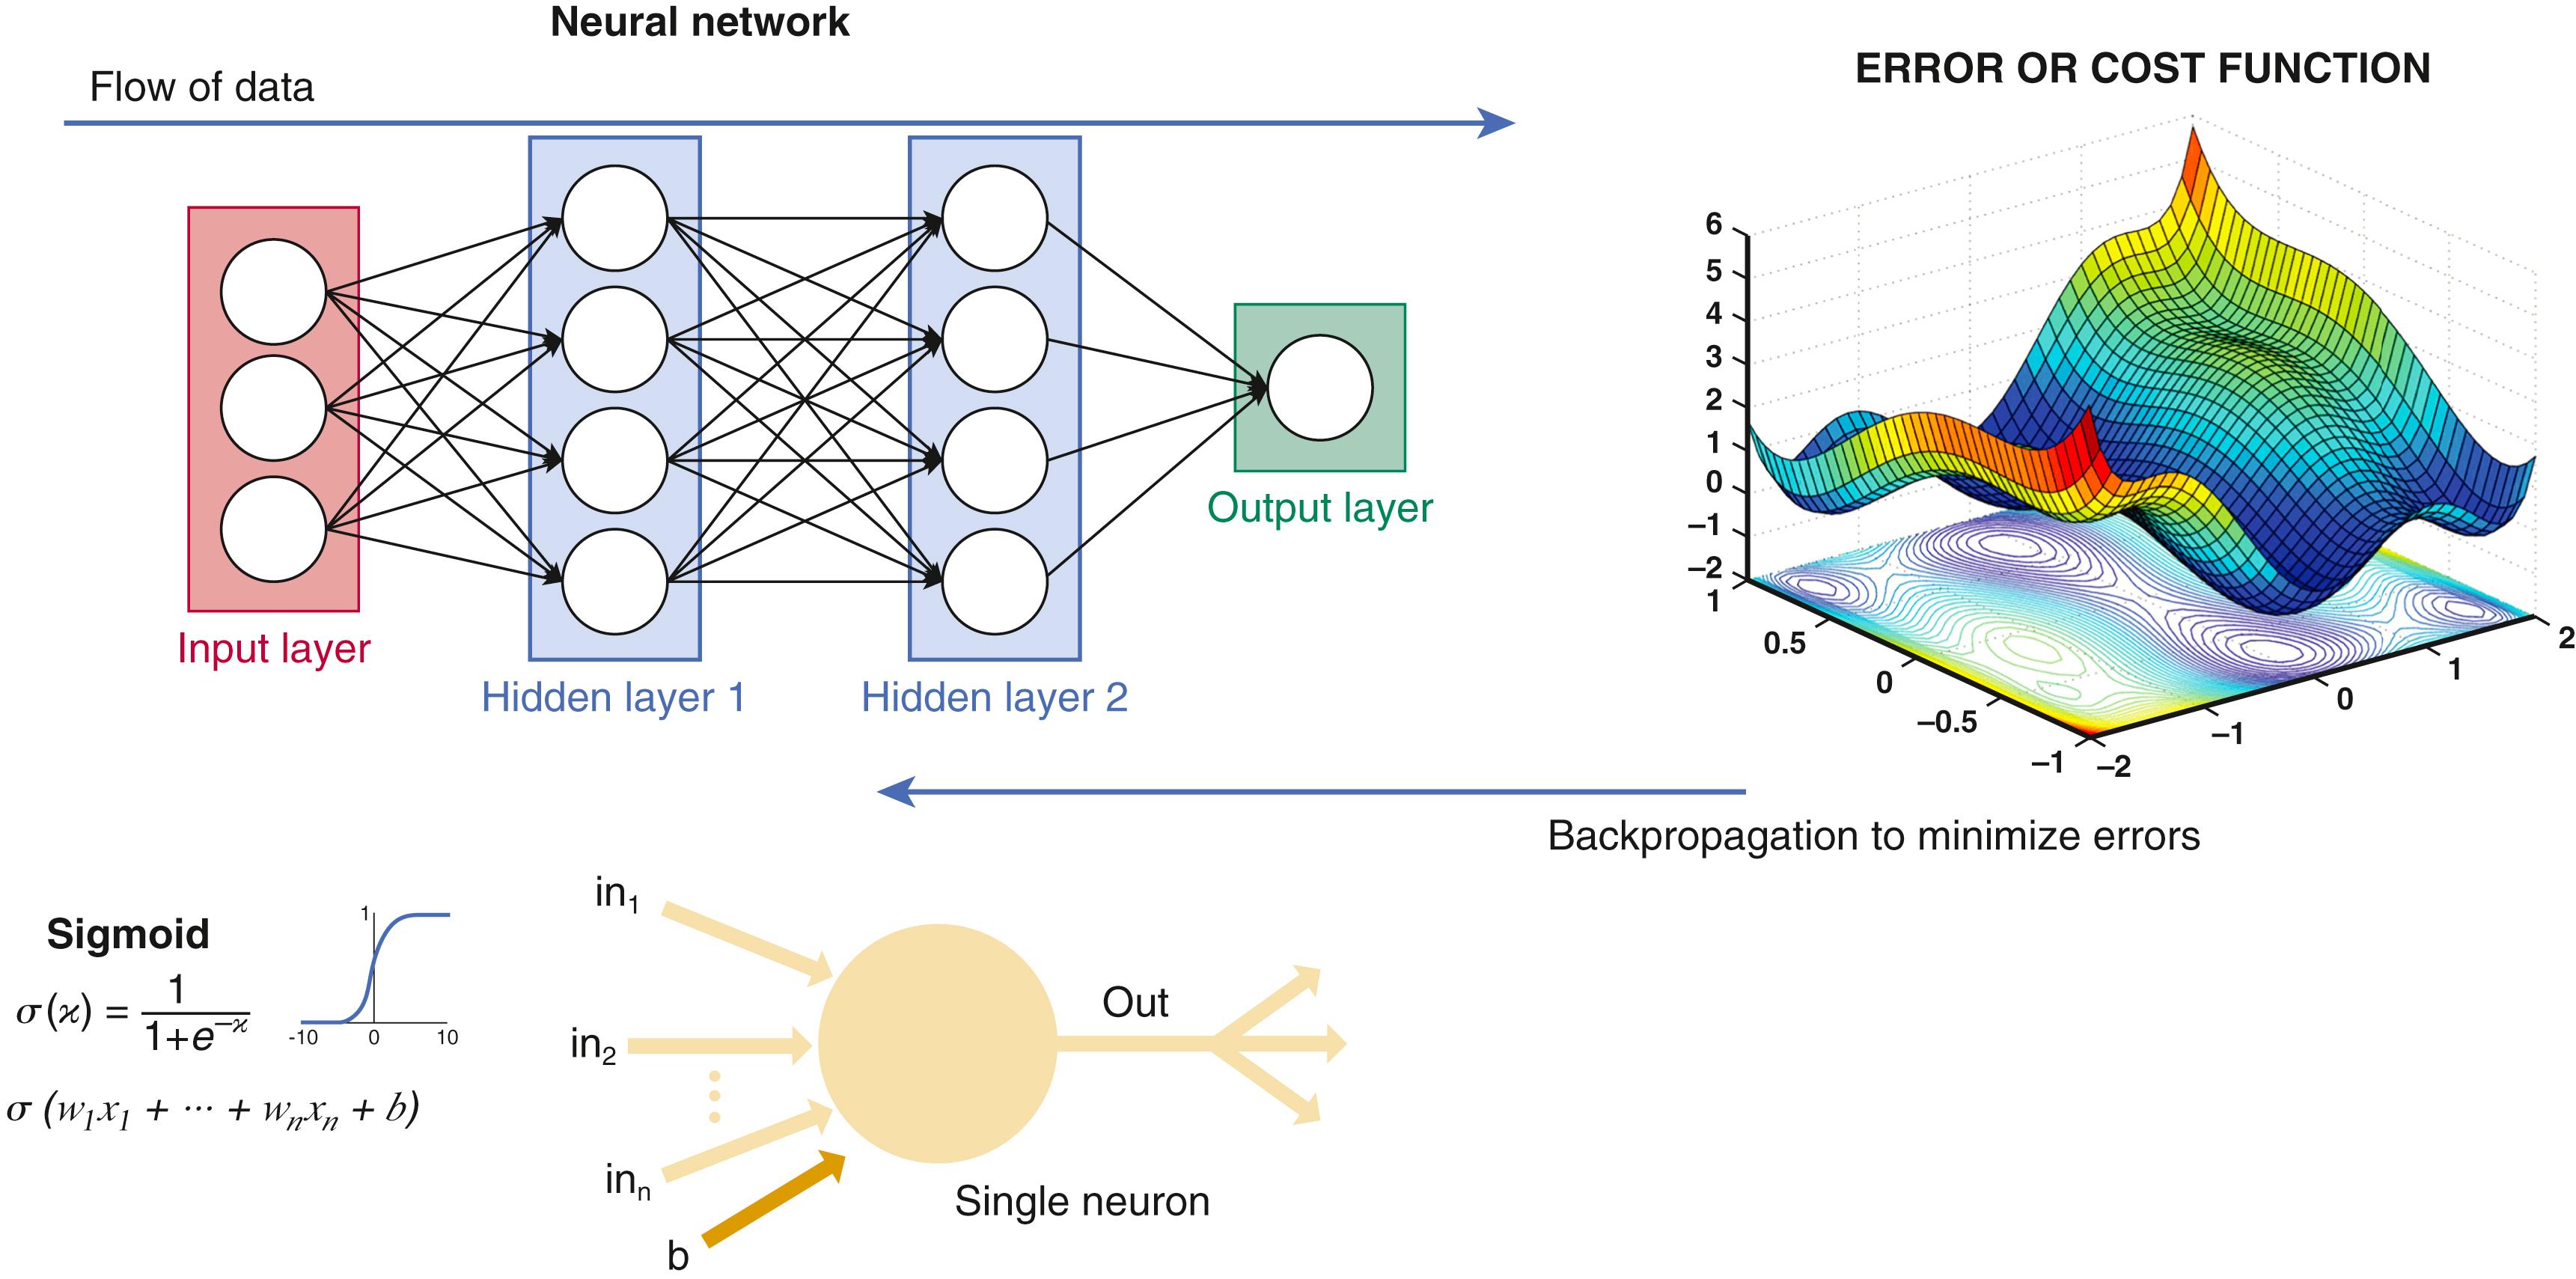 FIGURE 11.1, Graphical depiction of a neural network. Top left: The neural network shown contains four layers. Each layer is composed of “neurons” (bottom panel) . Each neuron receives multiple inputs, each multiplied by a weight (in1…inn), and a bias (offset) “b” and applies a nonlinear function to generate its output. During network training, weights and biases of each neuron are adjusted via backpropagation to minimize an error function (example error function shown top right ).